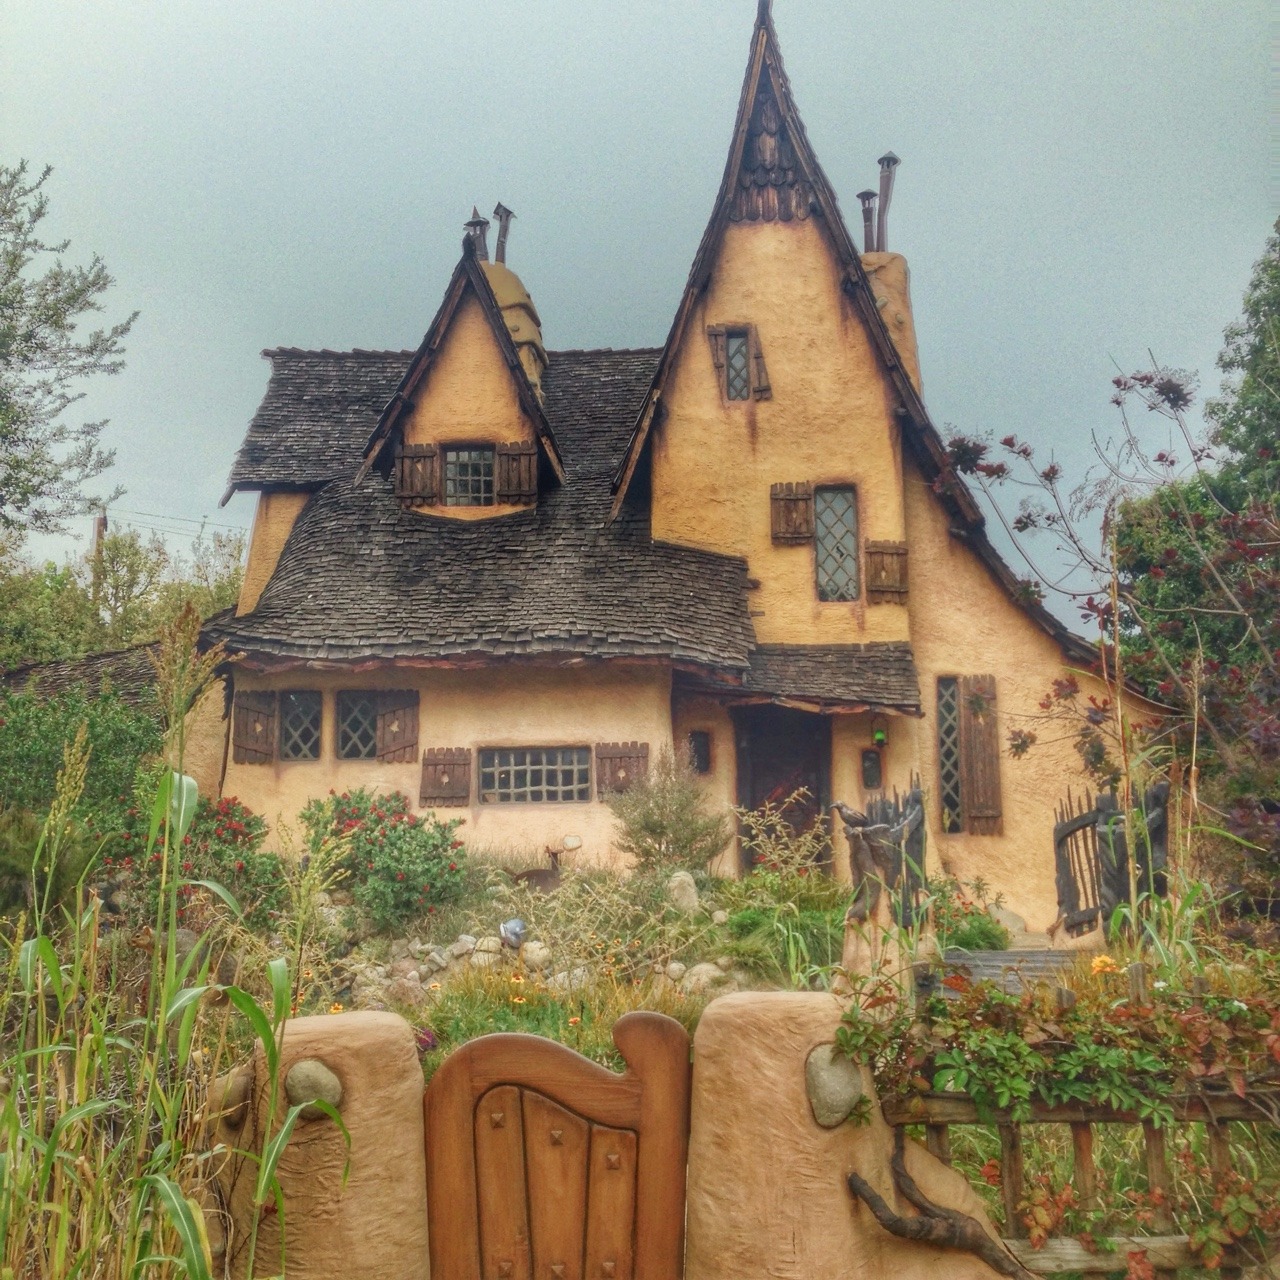 “The Spadena House, also known as The Witch’s...